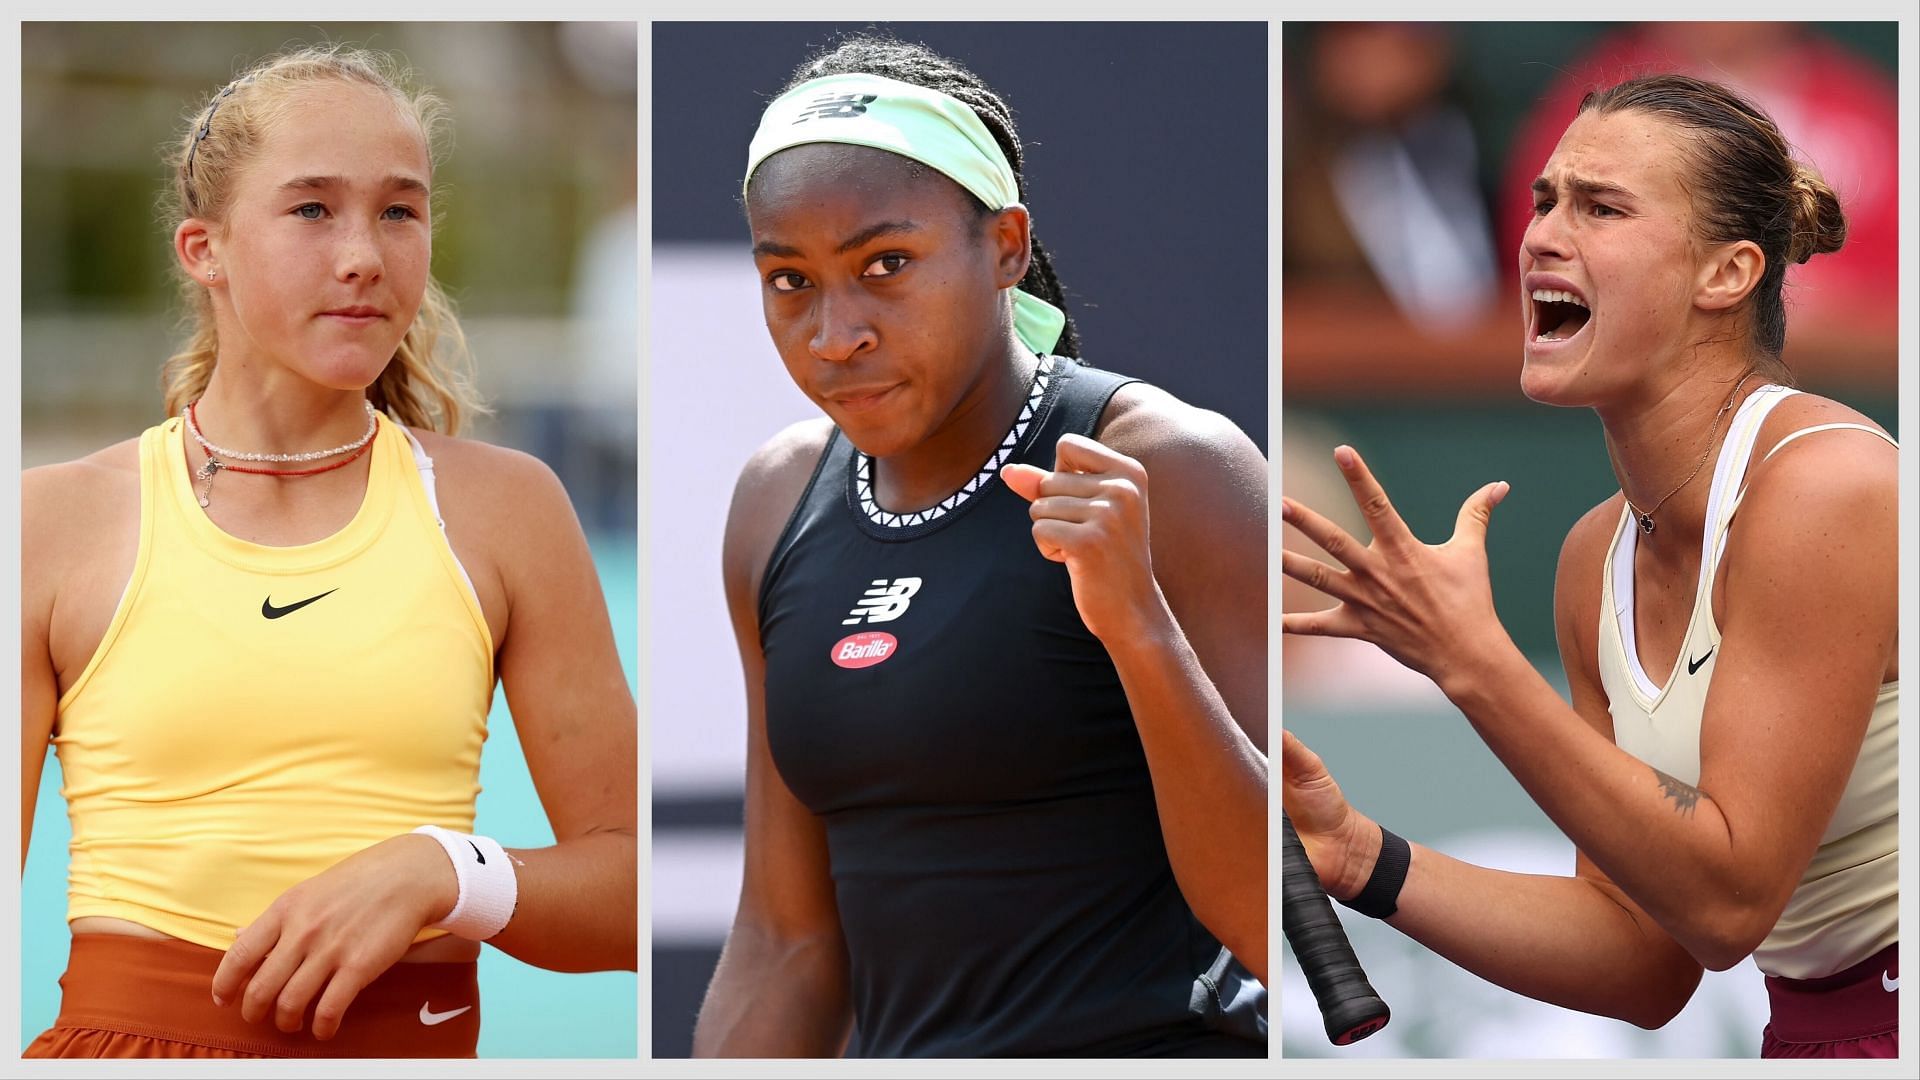 Coco Gauff and Mirra Andreeva have gained places while Aryna Sabalenka has dropped down to World No. 3 in the latest WTA rankings